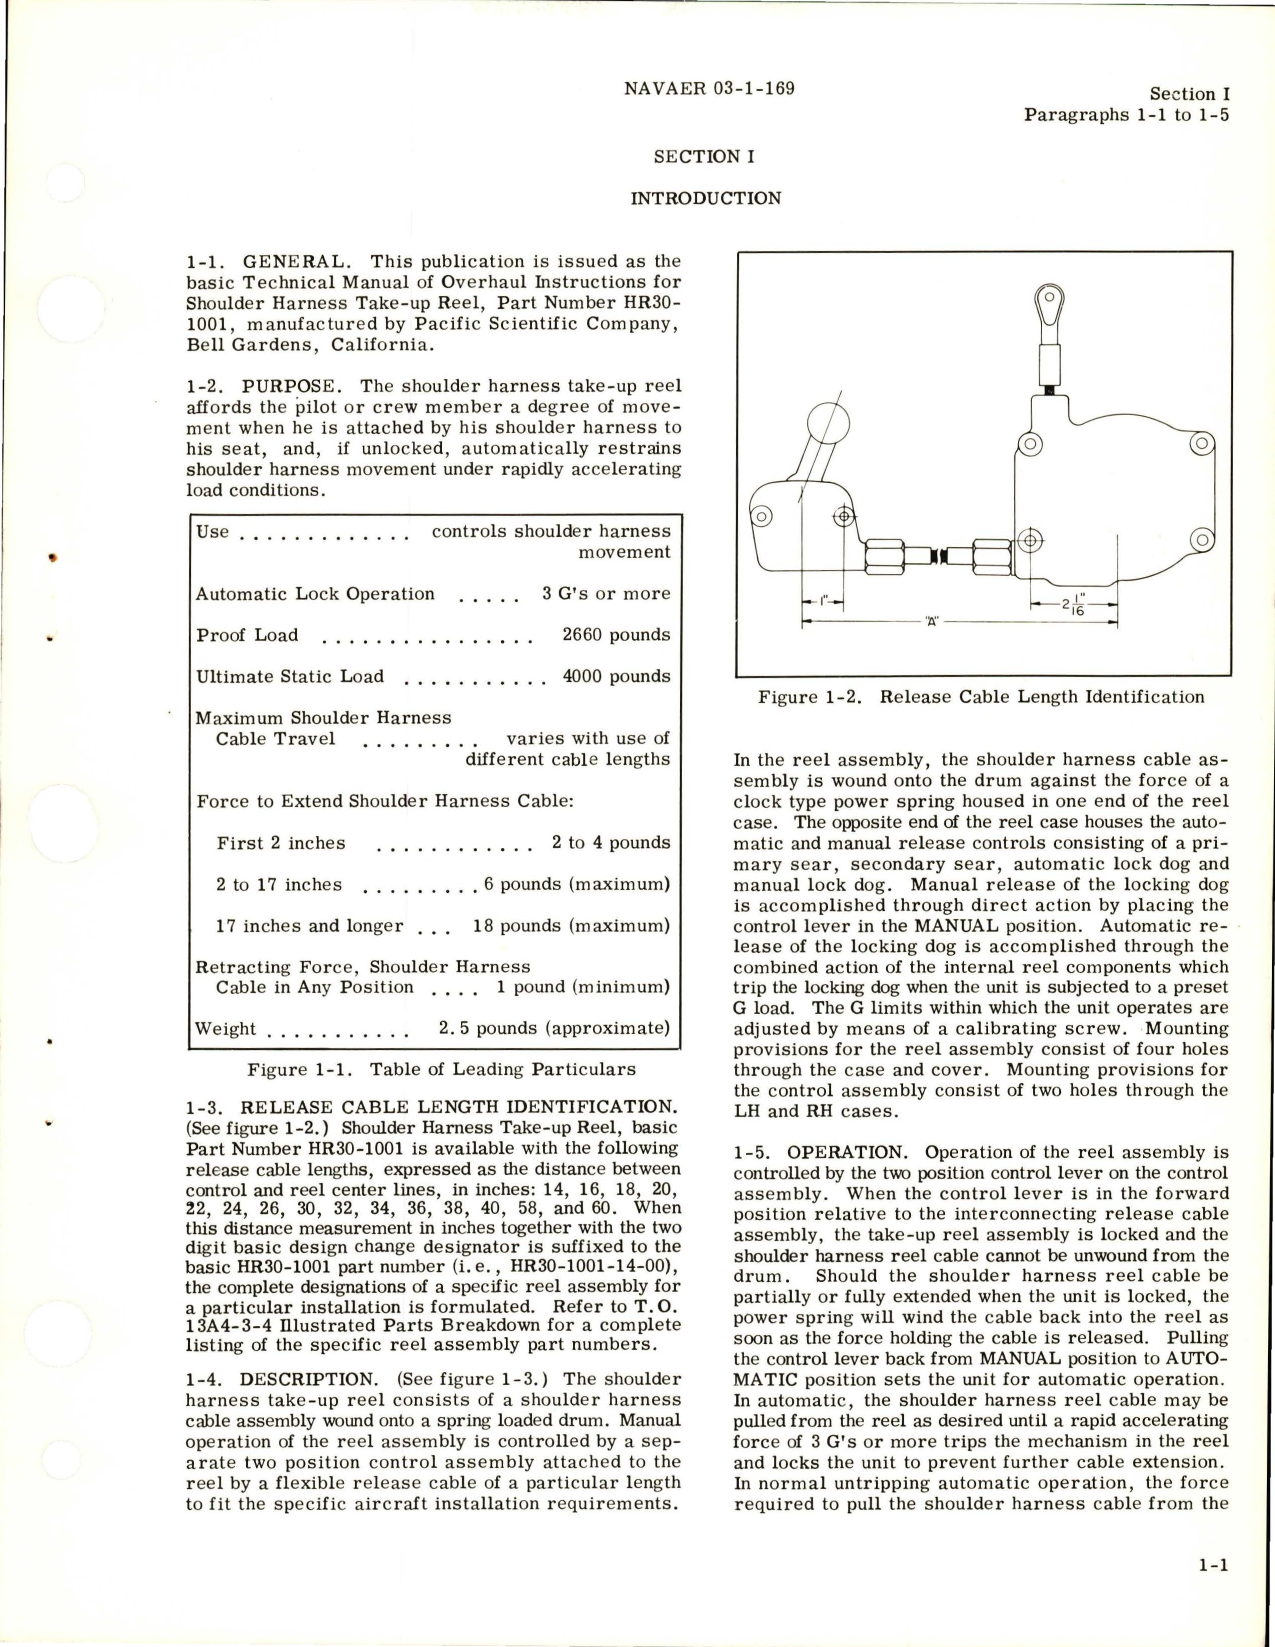 Sample page 5 from AirCorps Library document: Overhaul Instructions for Shoulder Harness Take-Up Reels